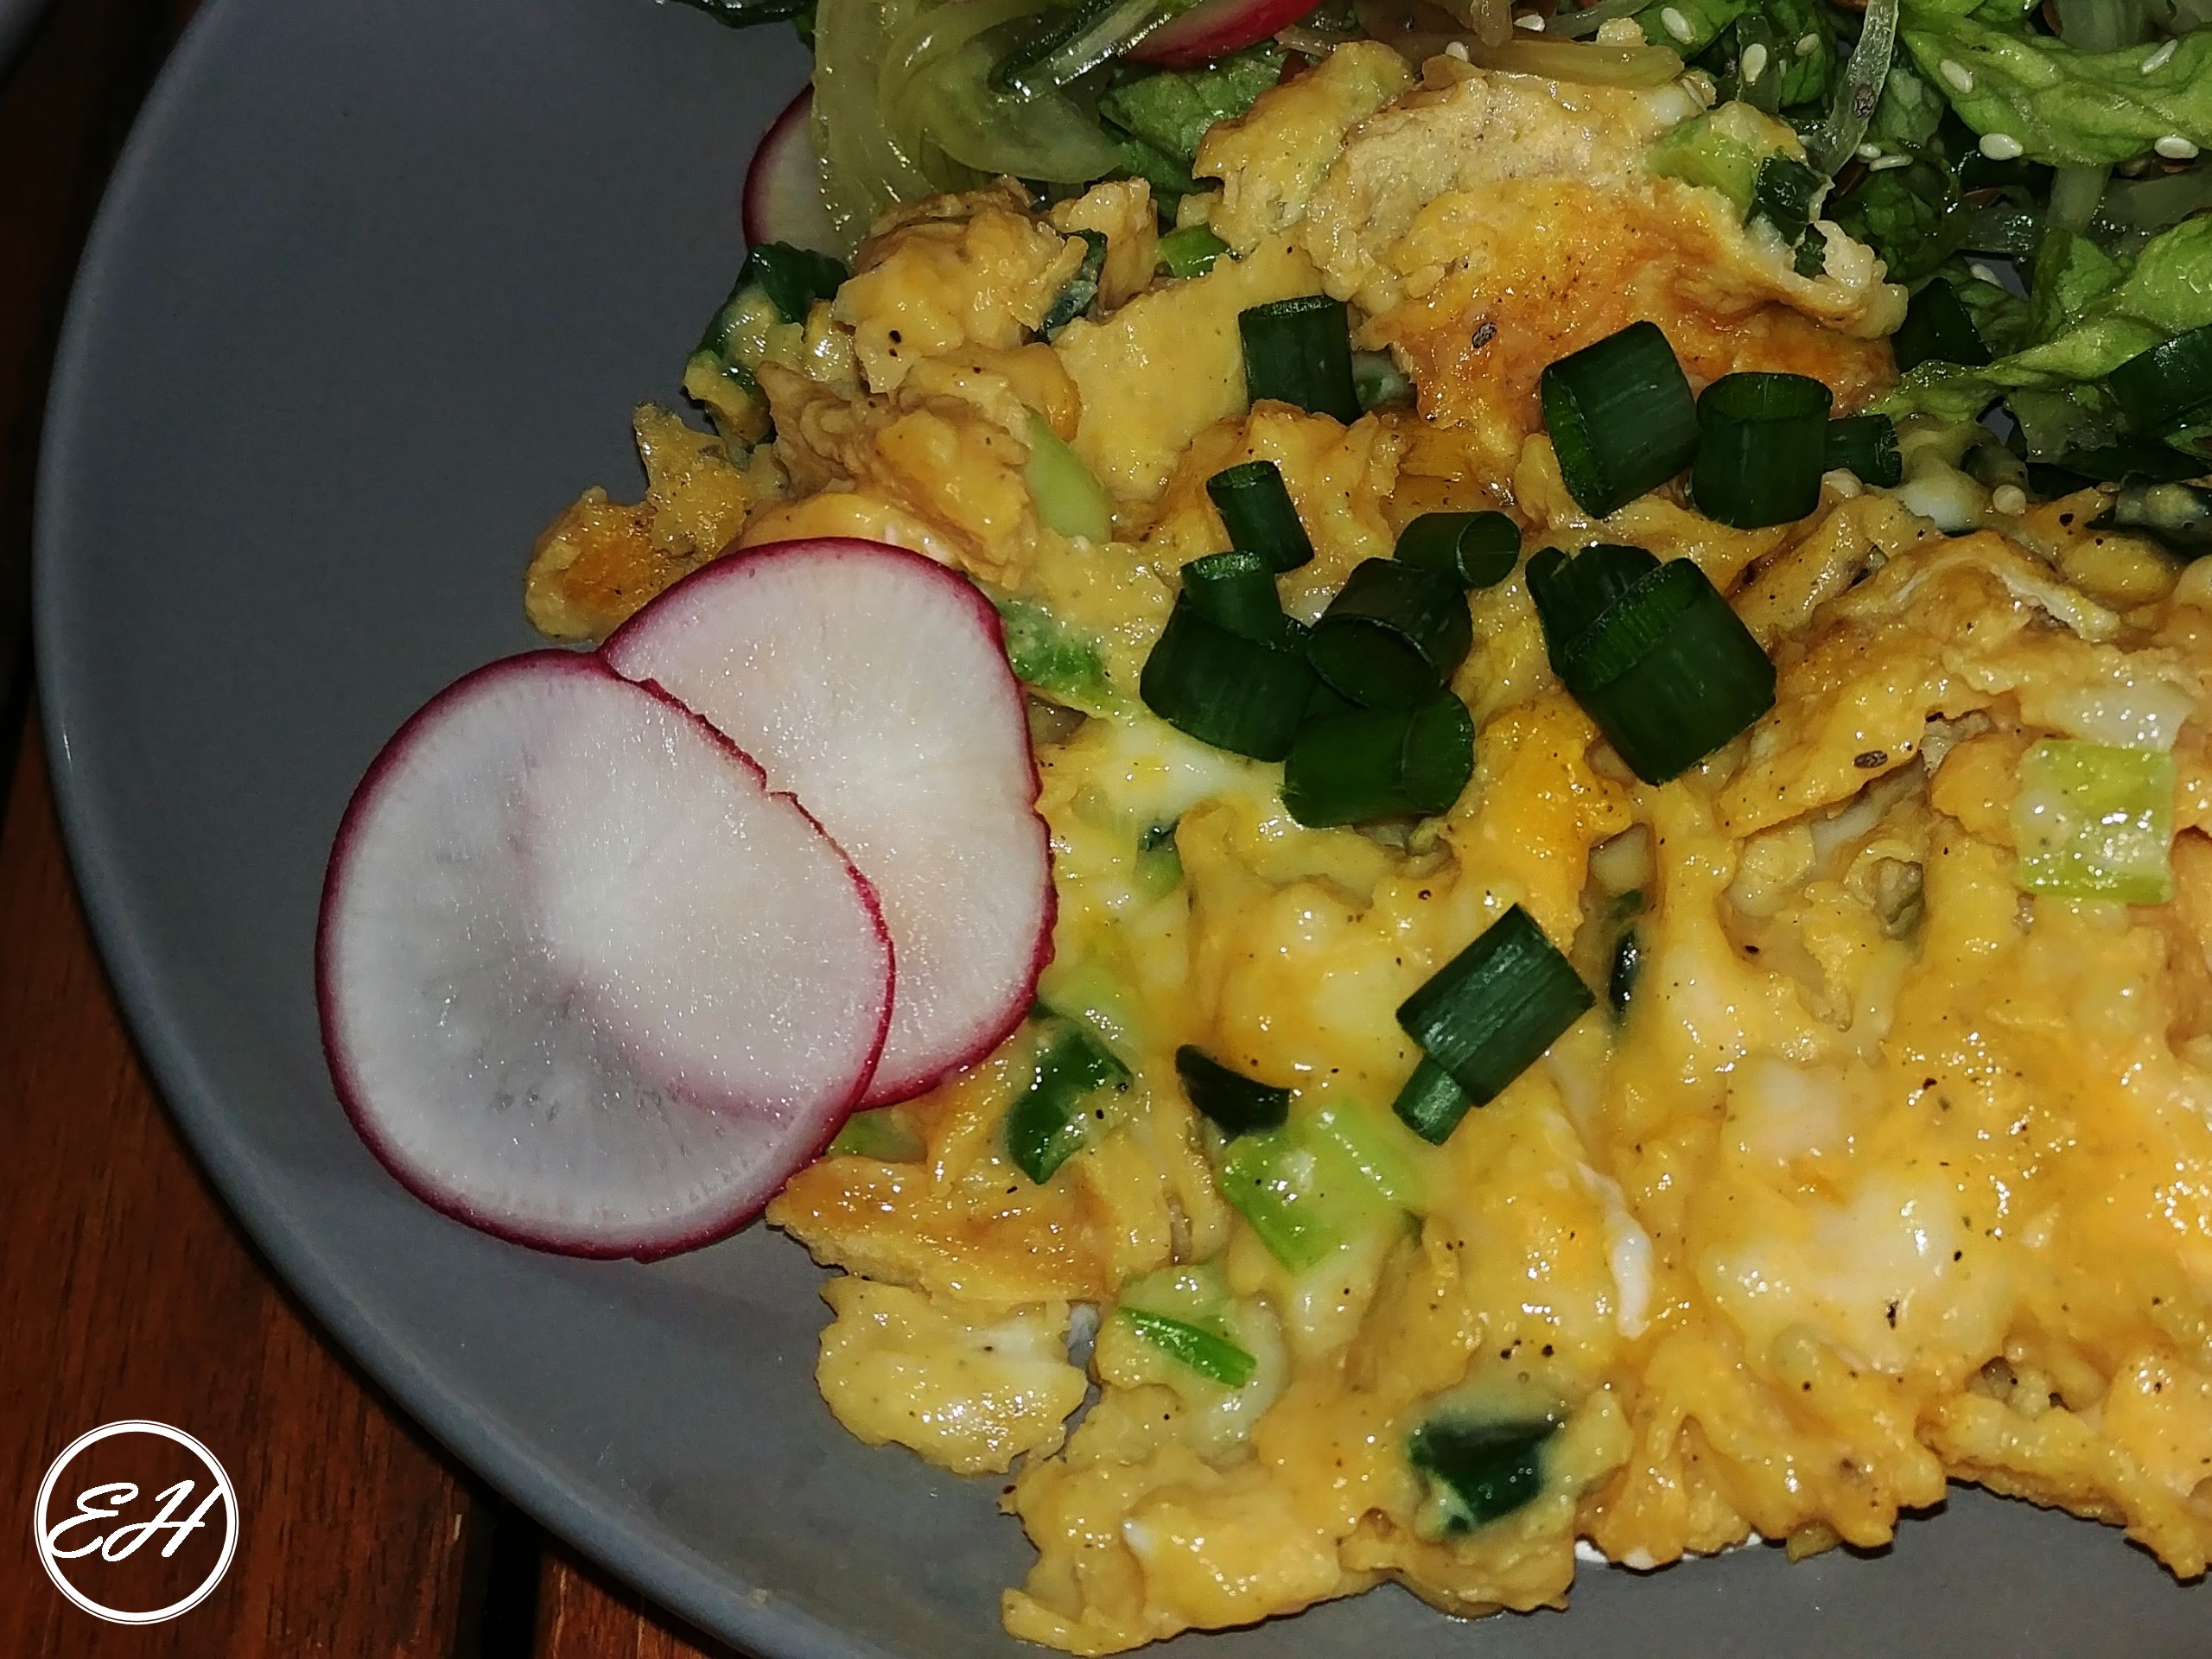 Scrambled Eggs with Cheese and Green Onions - Extravagance House